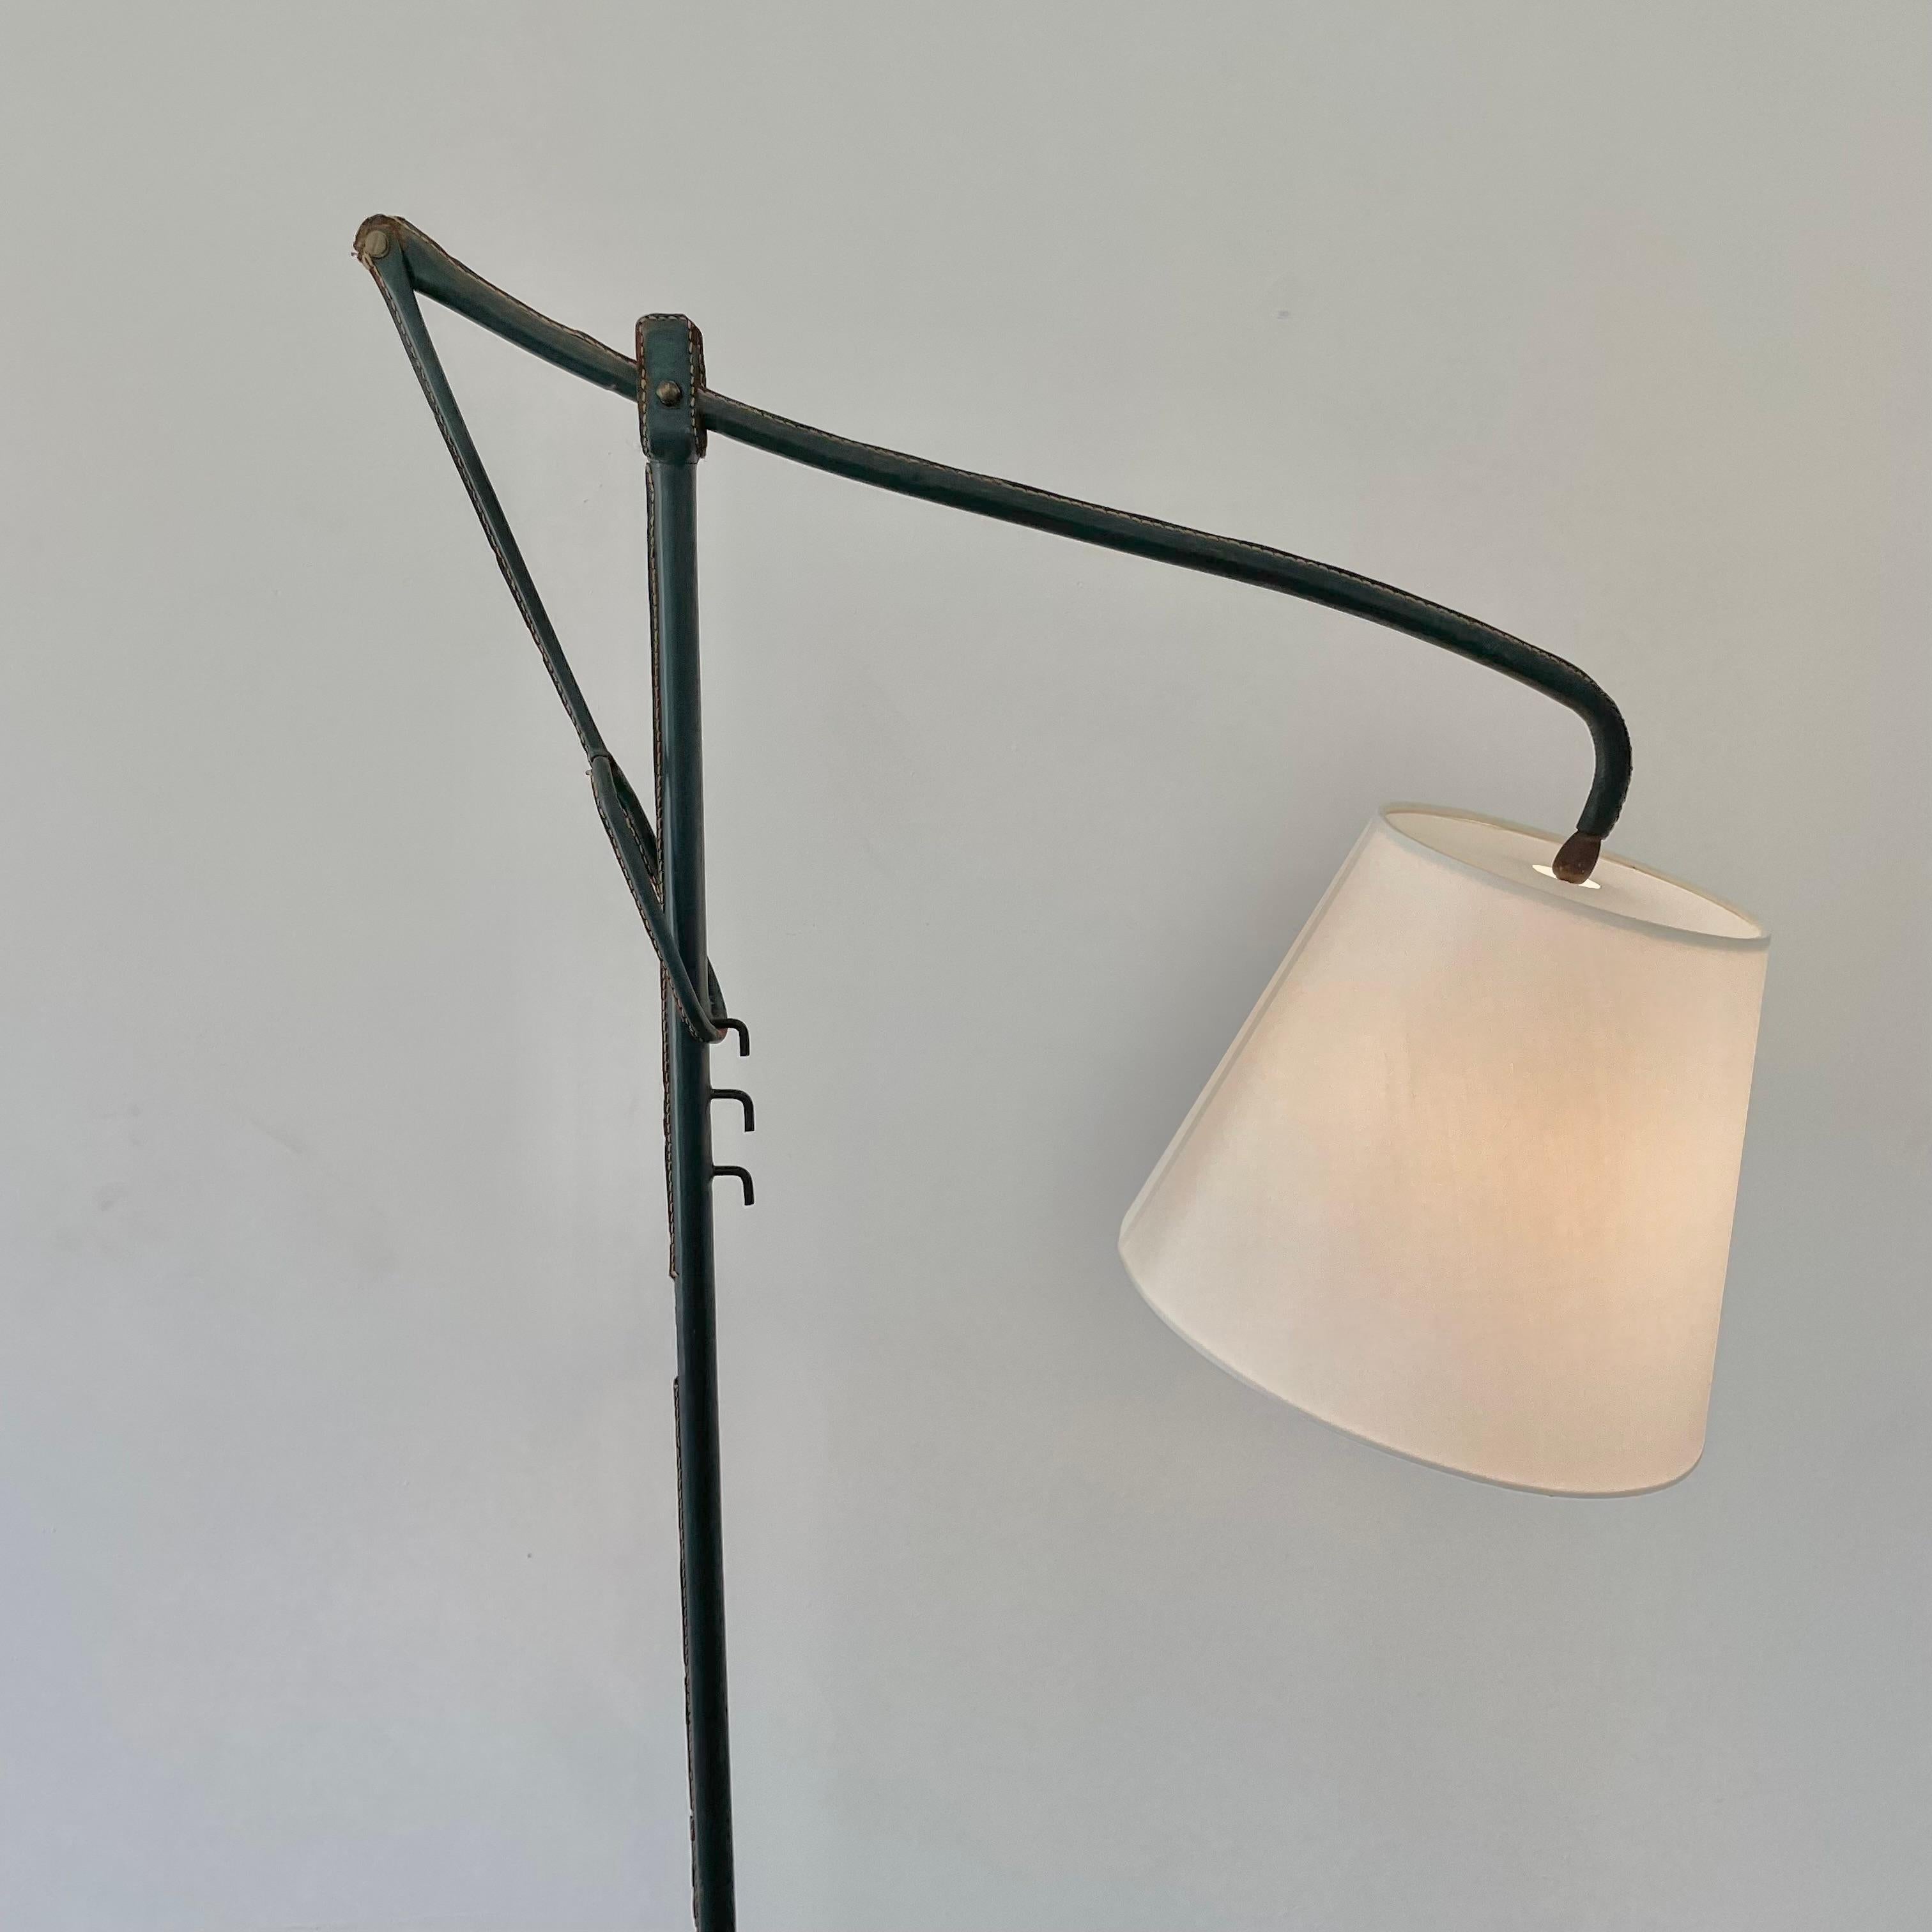 Jacques Adnet Adjustable Green Leather Floor Lamp, 1950s France For Sale 3